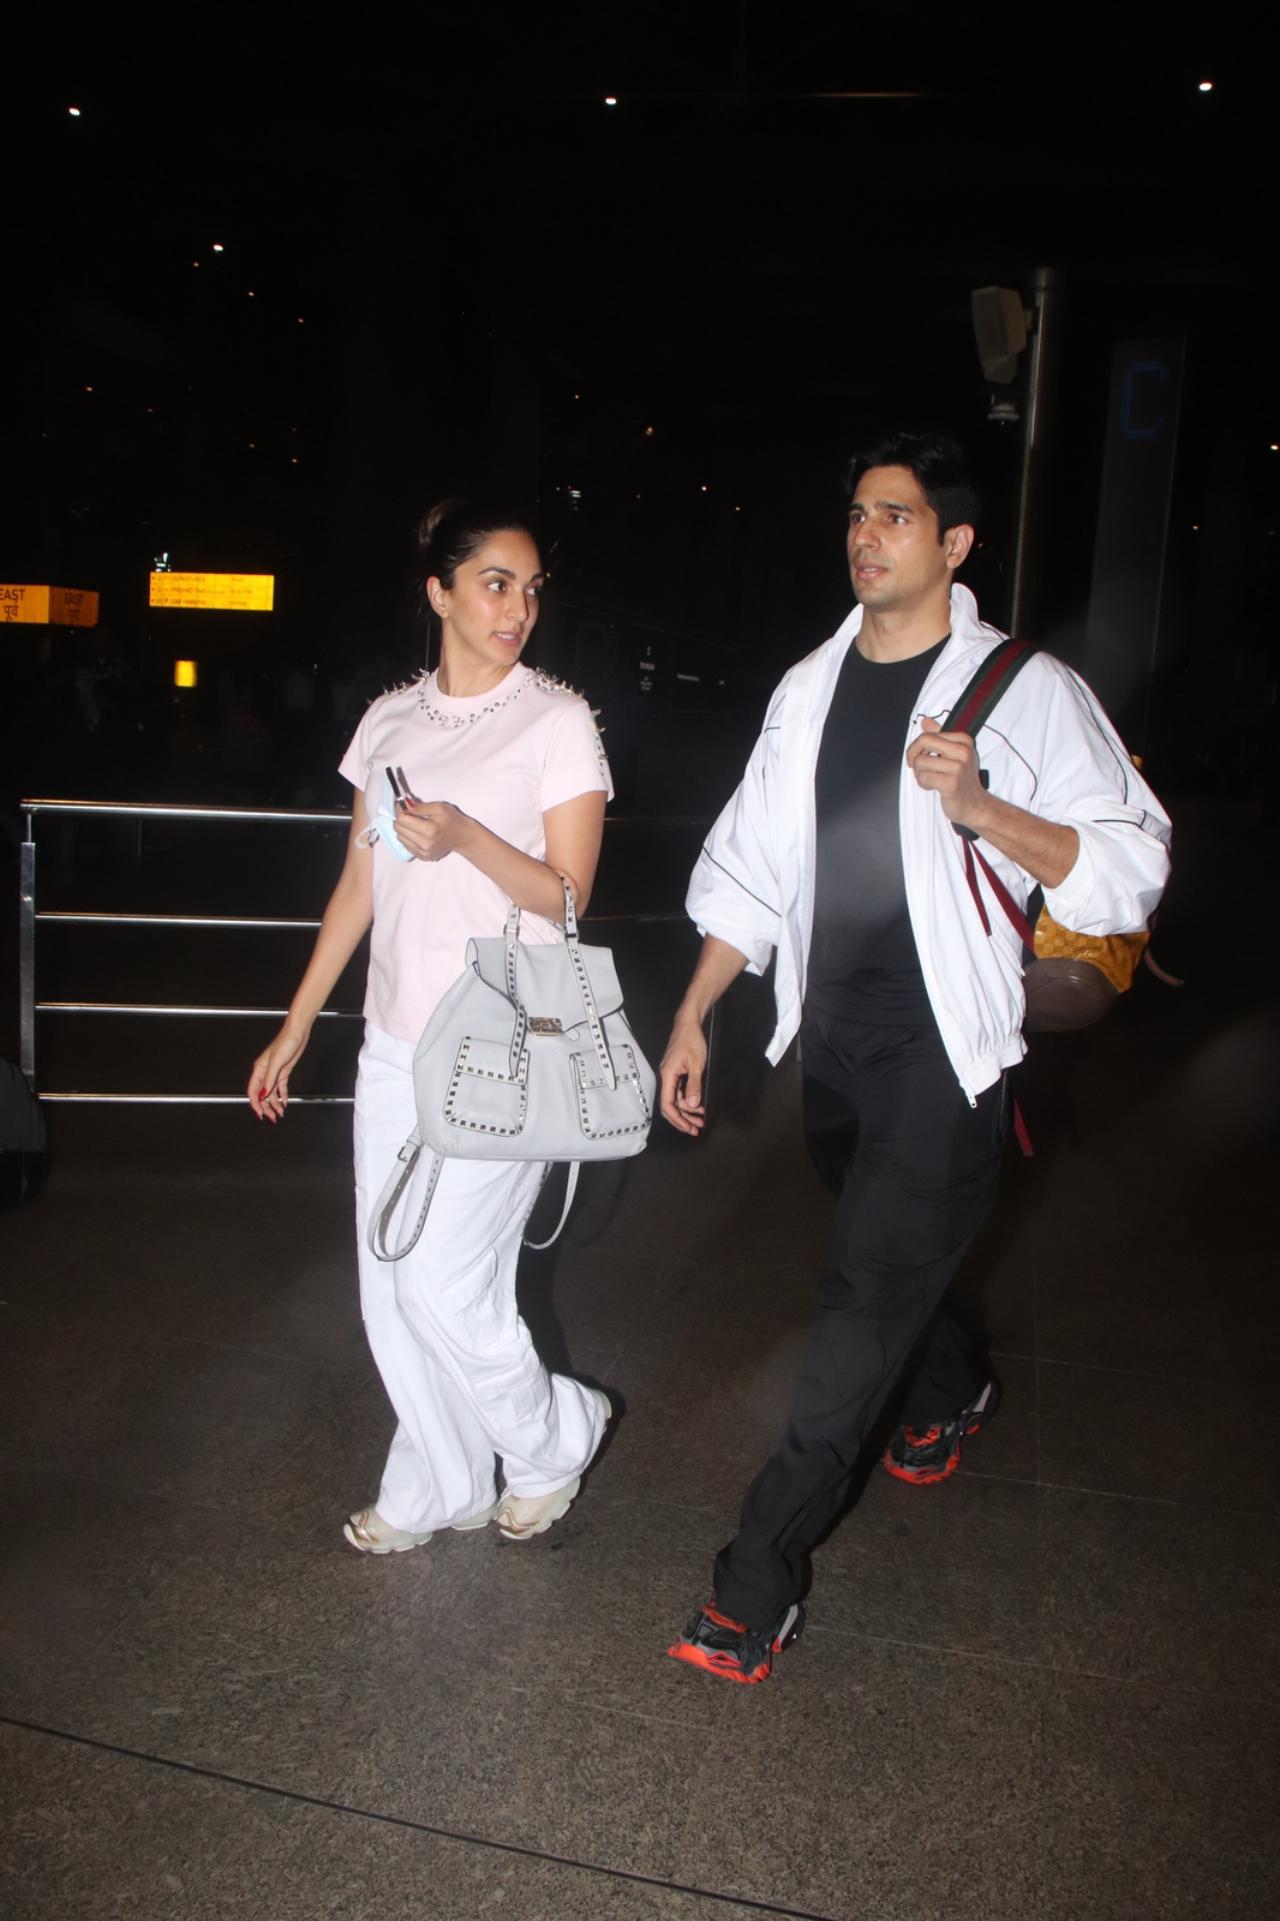 Meanwhile, the rumours of the two dating started when they started working together on the film, 'Shershaah'. The film was released on Amazon Prime Video in 2021. 
On the work front, Sidharth will next be seen in the film 'Mission Majnu' while Kiara has 'Satya Prem Ki Katha', yet untitled film with Ram Charan and others in the pipeline